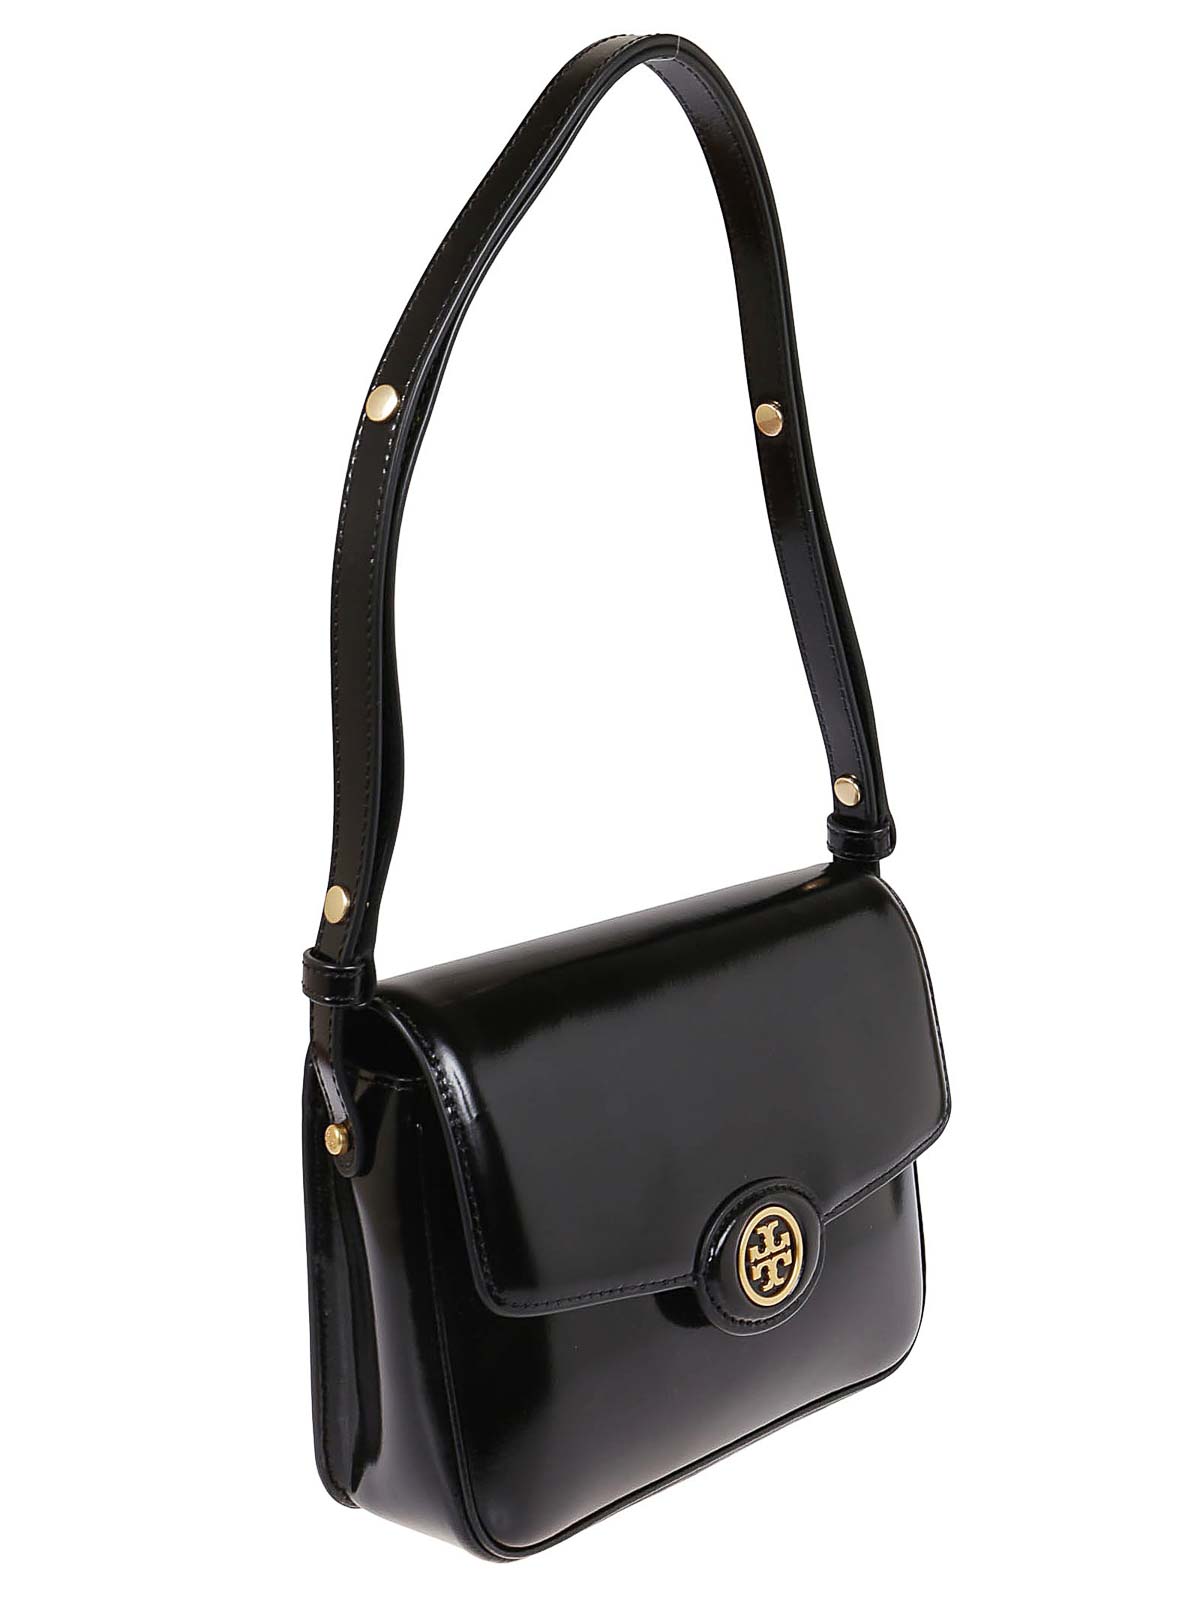 Tory Burch Fall 2020 Ready-to-Wear Collection | Tory burch fall, Tory burch  handbags, Tory burch